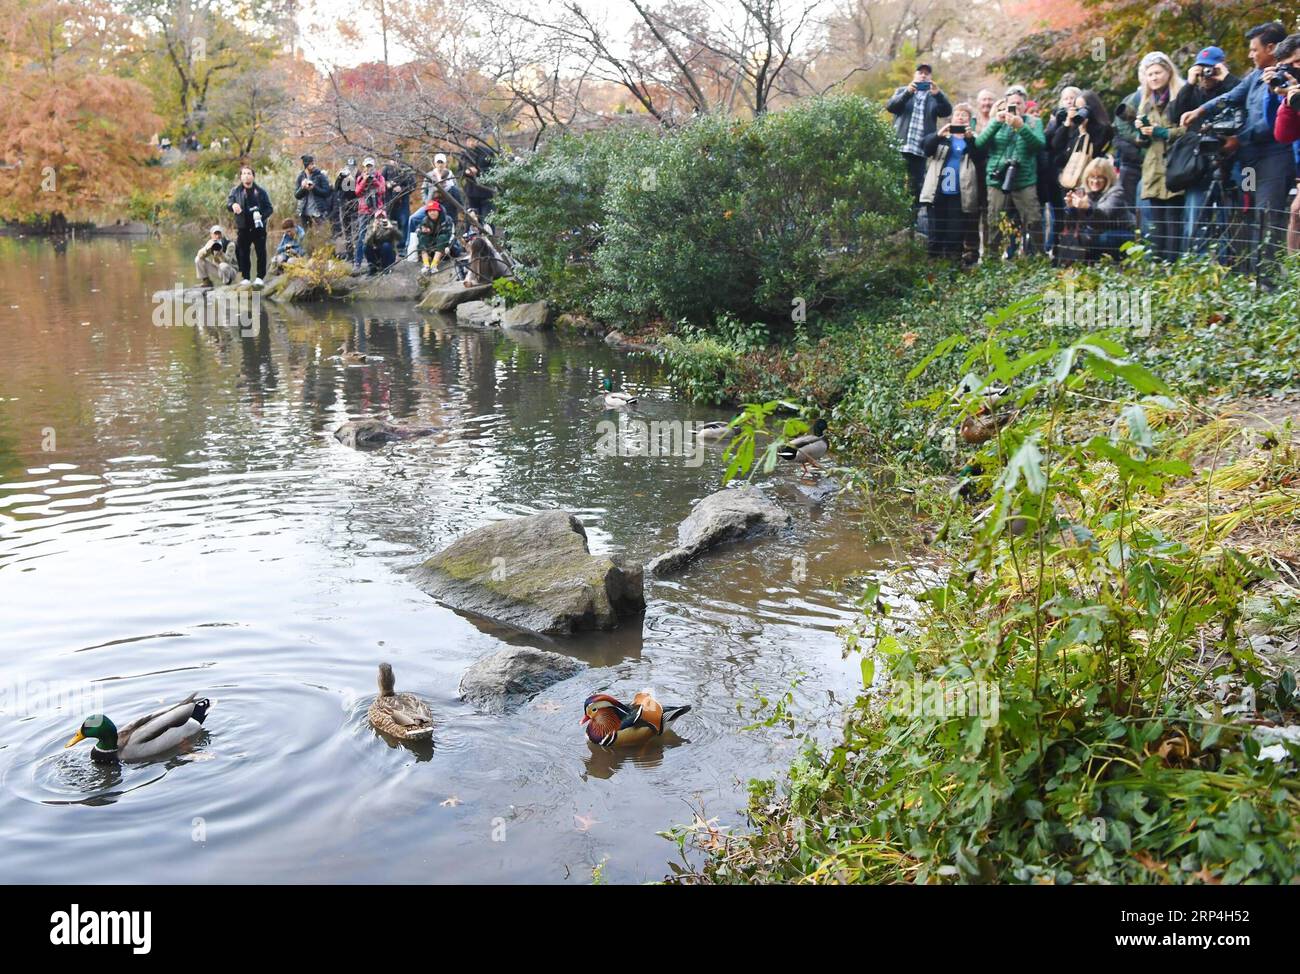 (181109) -- NEW YORK, Nov. 9, 2018 -- People watch and take photos of a Mandarin duck (R) at the Central Park in New York, the United States, on Nov. 8, 2018. Mandarin ducks are native to East Asia and renowned for their dazzling multicolored feathers. This rare Mandarin duck, first spotted in early October, has become a new star at the Central Park, one of New York City s most-visited attractions. ) (yk) U.S.-NEW YORK-MANDARIN DUCK LixRui PUBLICATIONxNOTxINxCHN Stock Photo